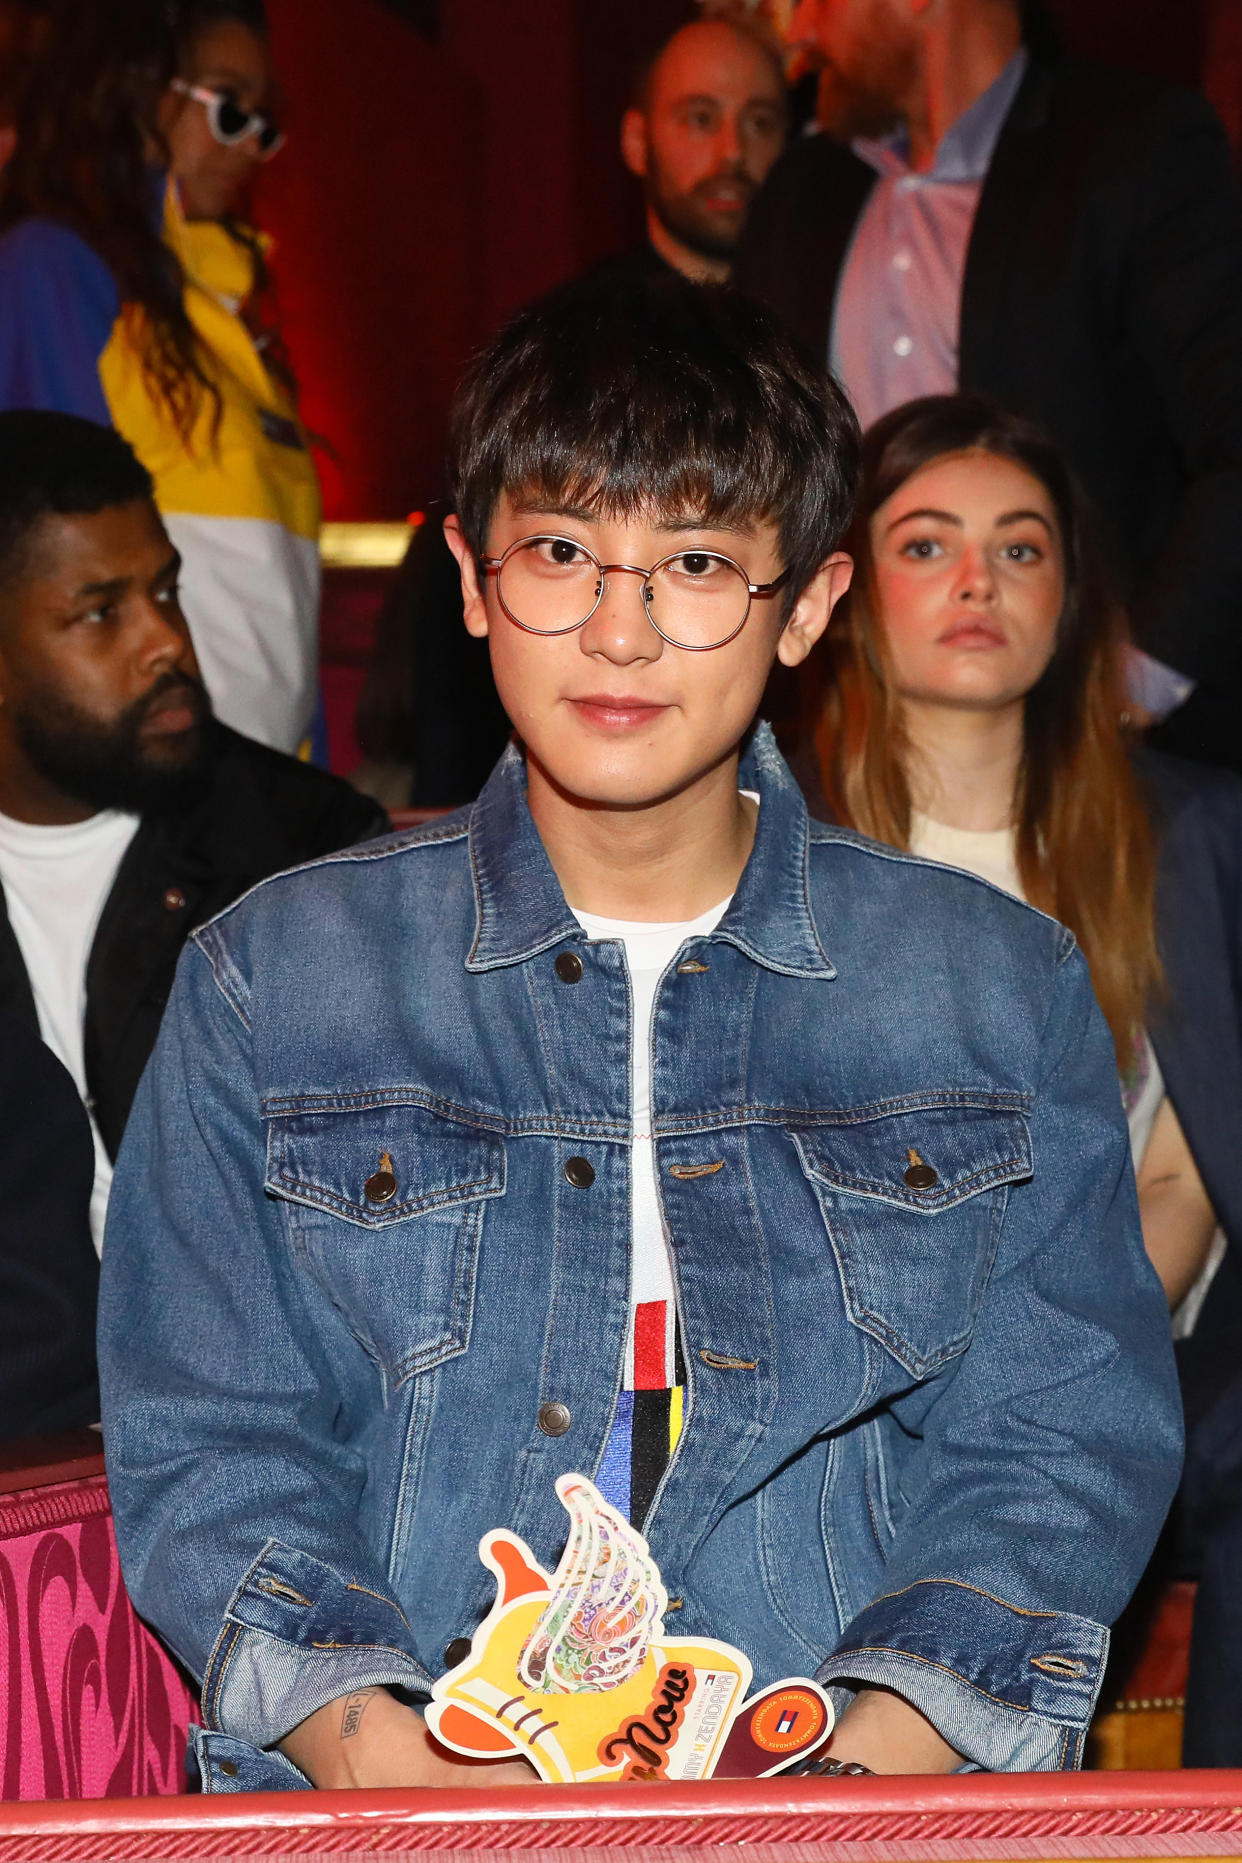 Park Chanyeol. (PHOTO: Tim P. Whitby/WireImage)